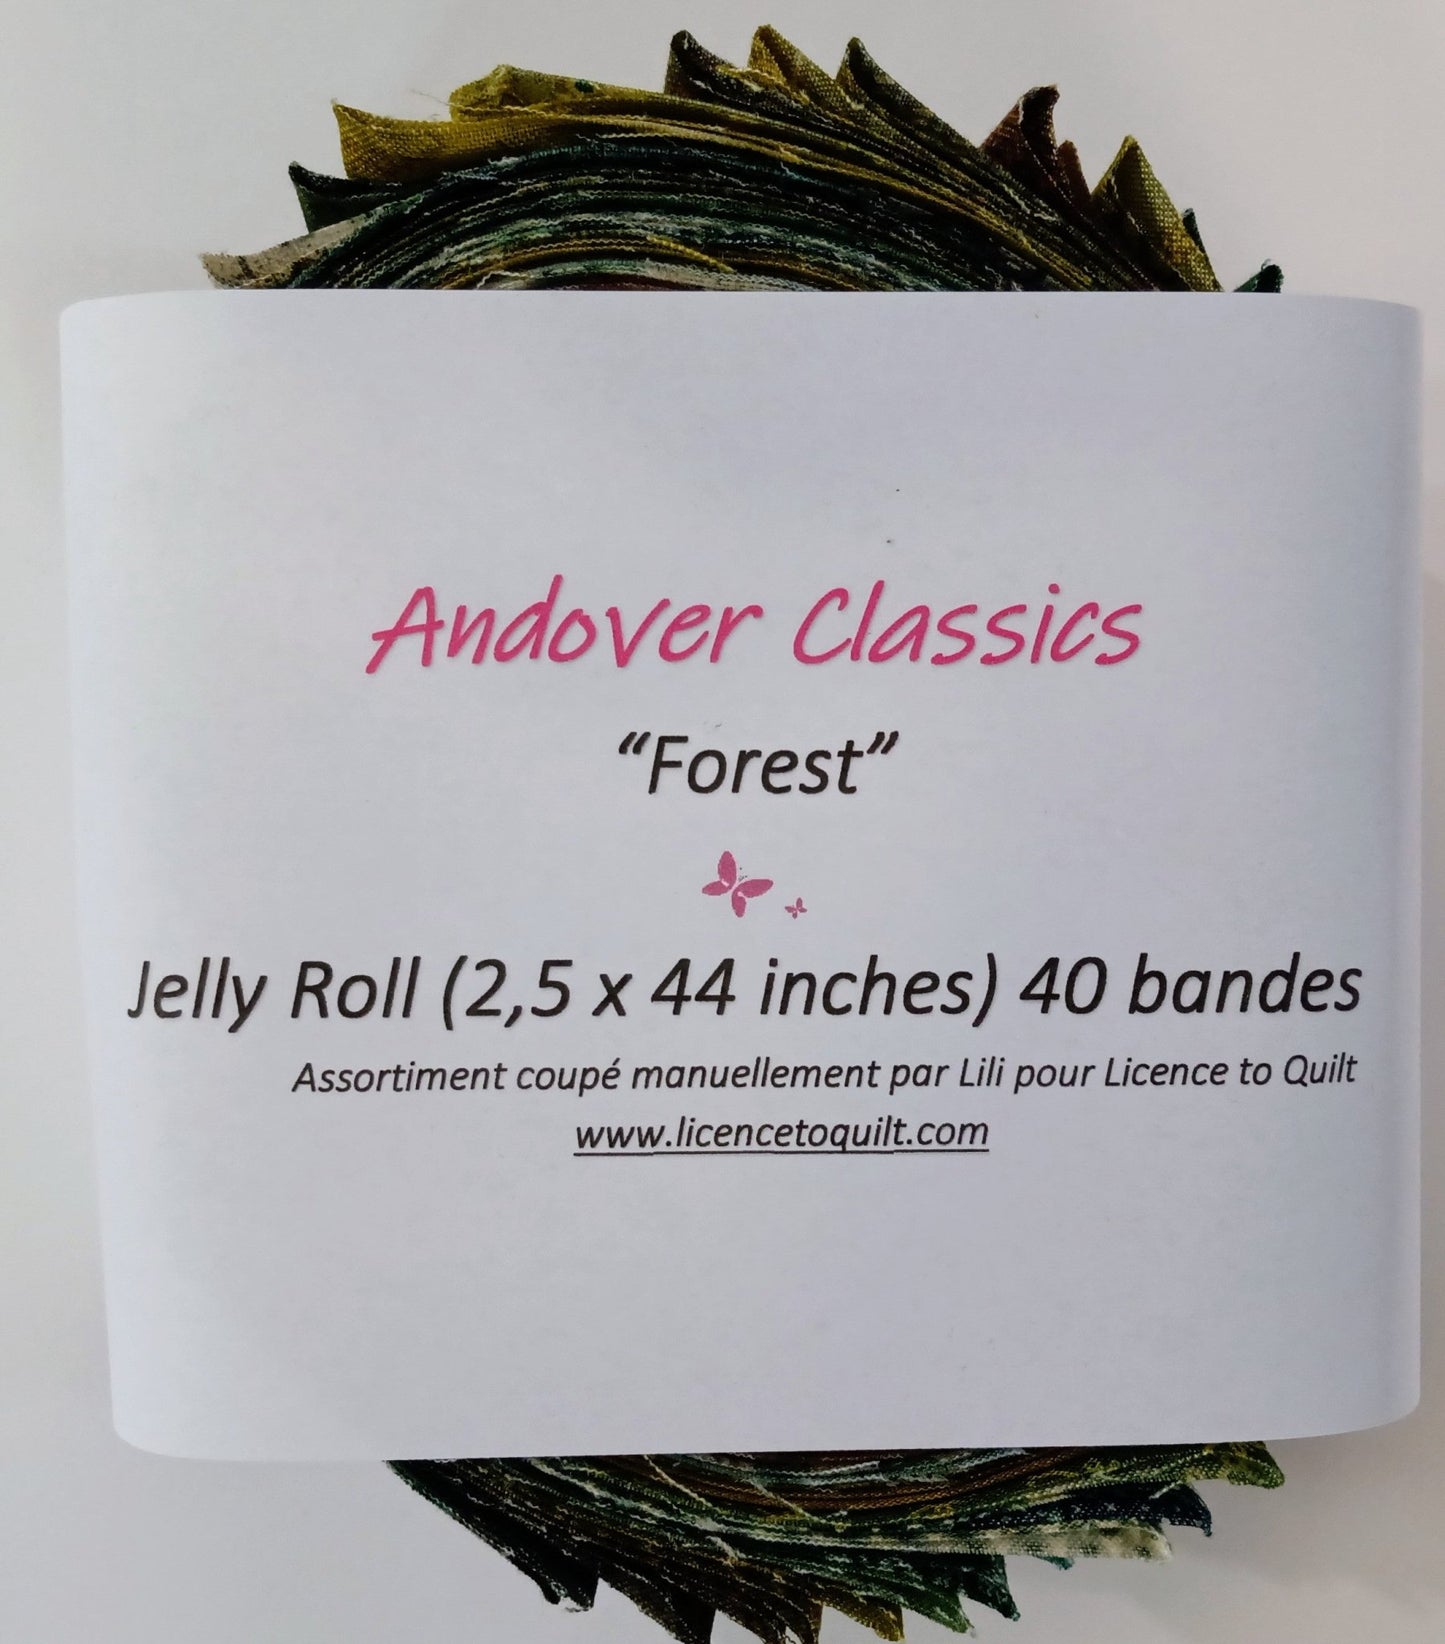 Andover Classics - Forest - Jelly Roll (40 bandes) - Licence To Quilt